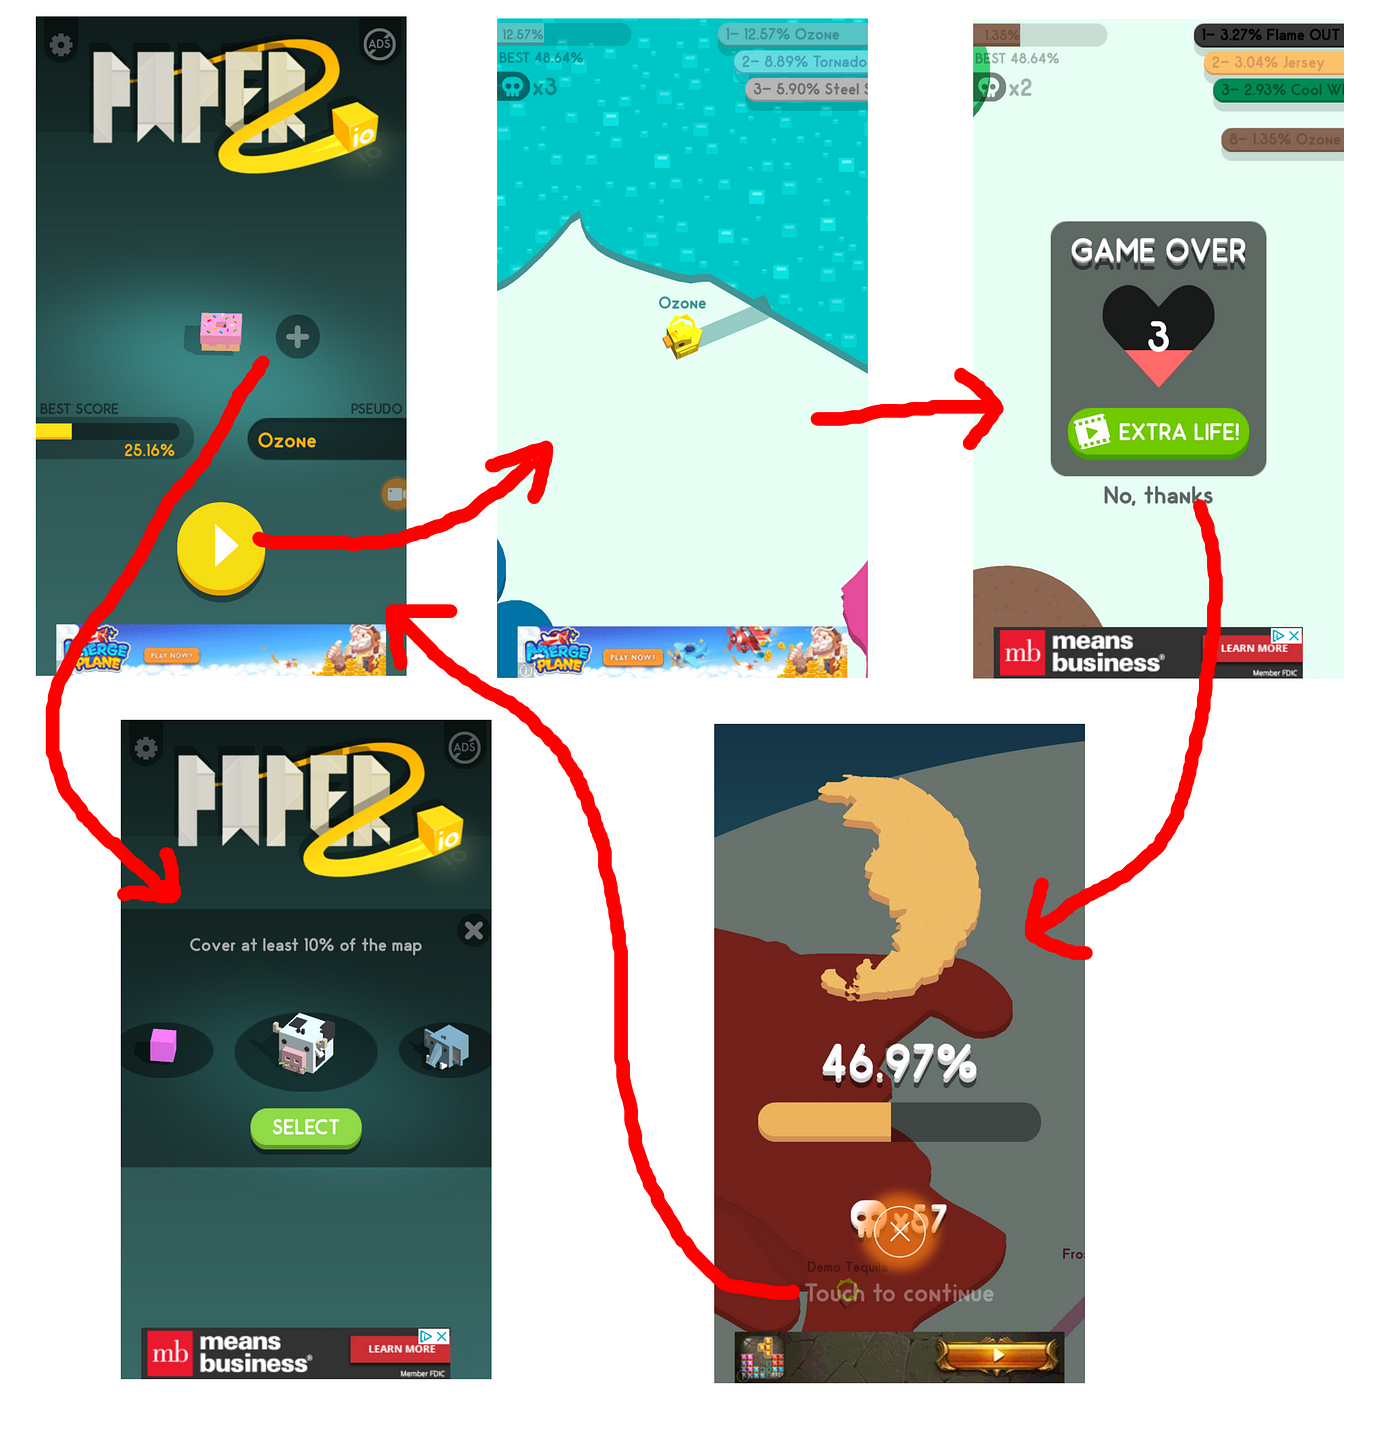 🎮 Paperio live - Play the ultimate paper.io game